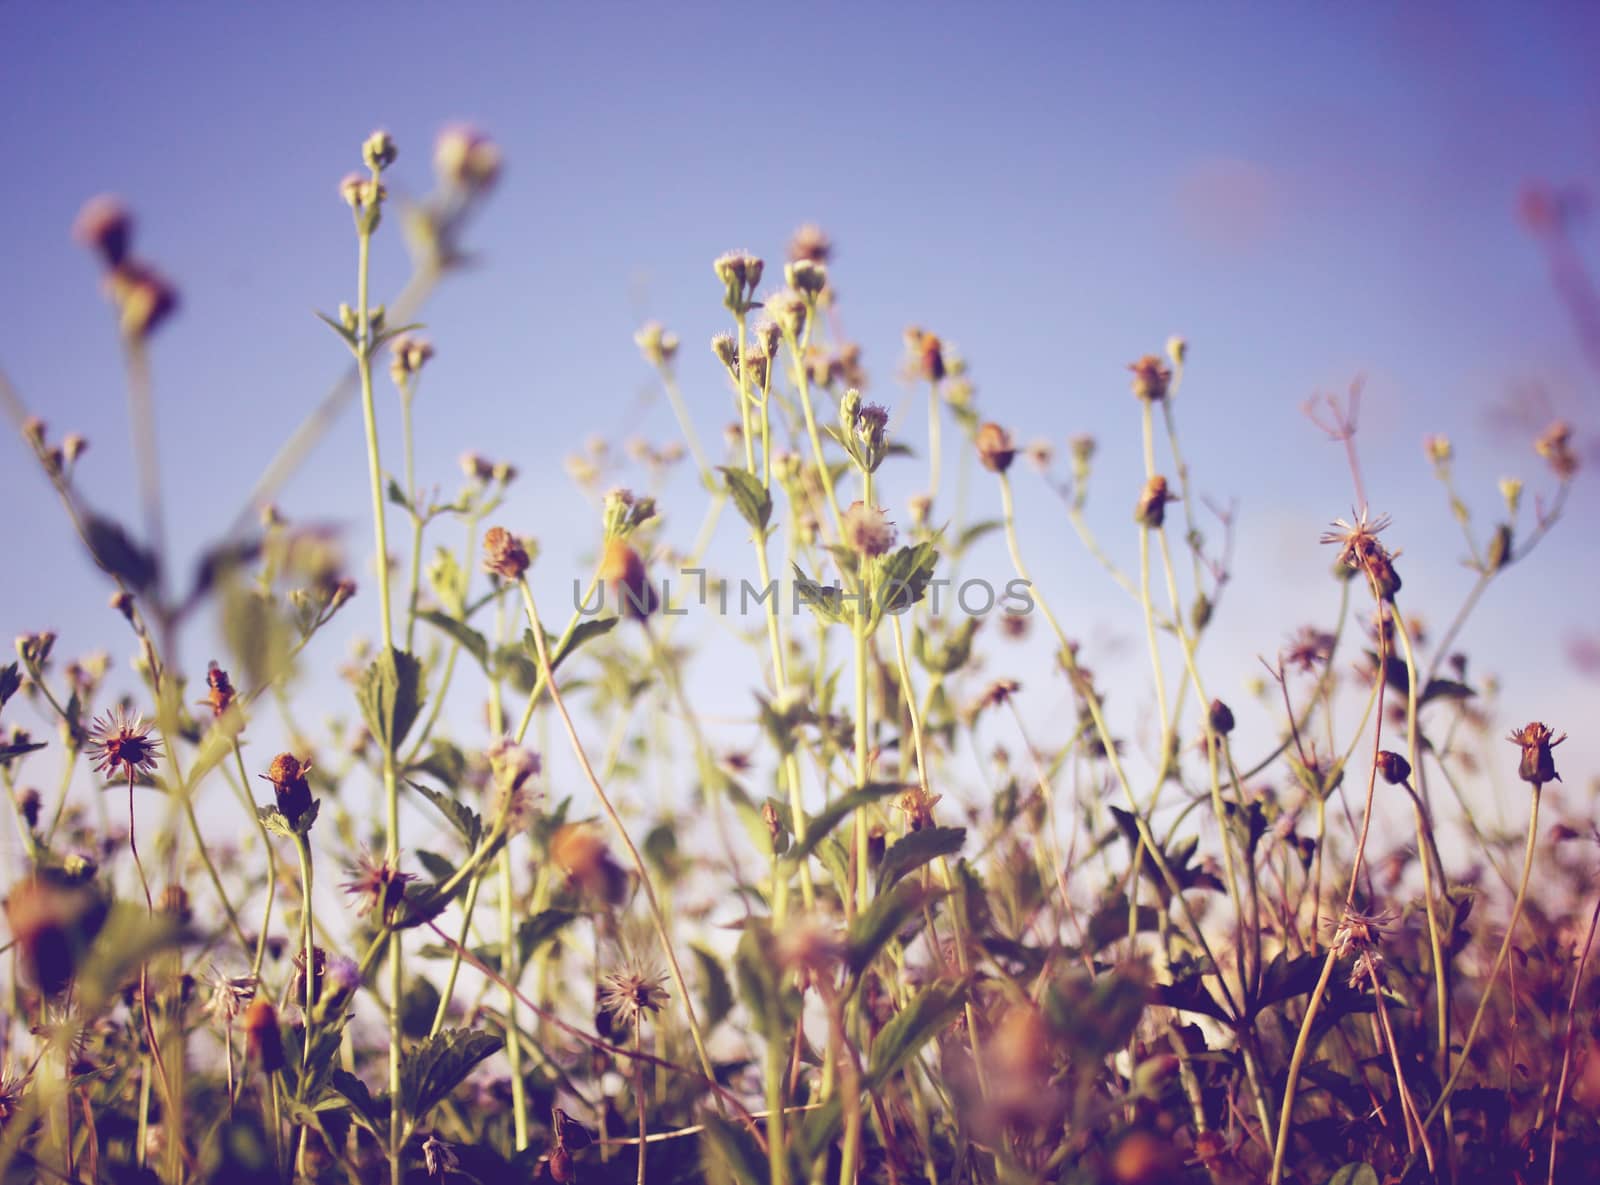 Dry meadow flowers and blue sky with retro filter effect